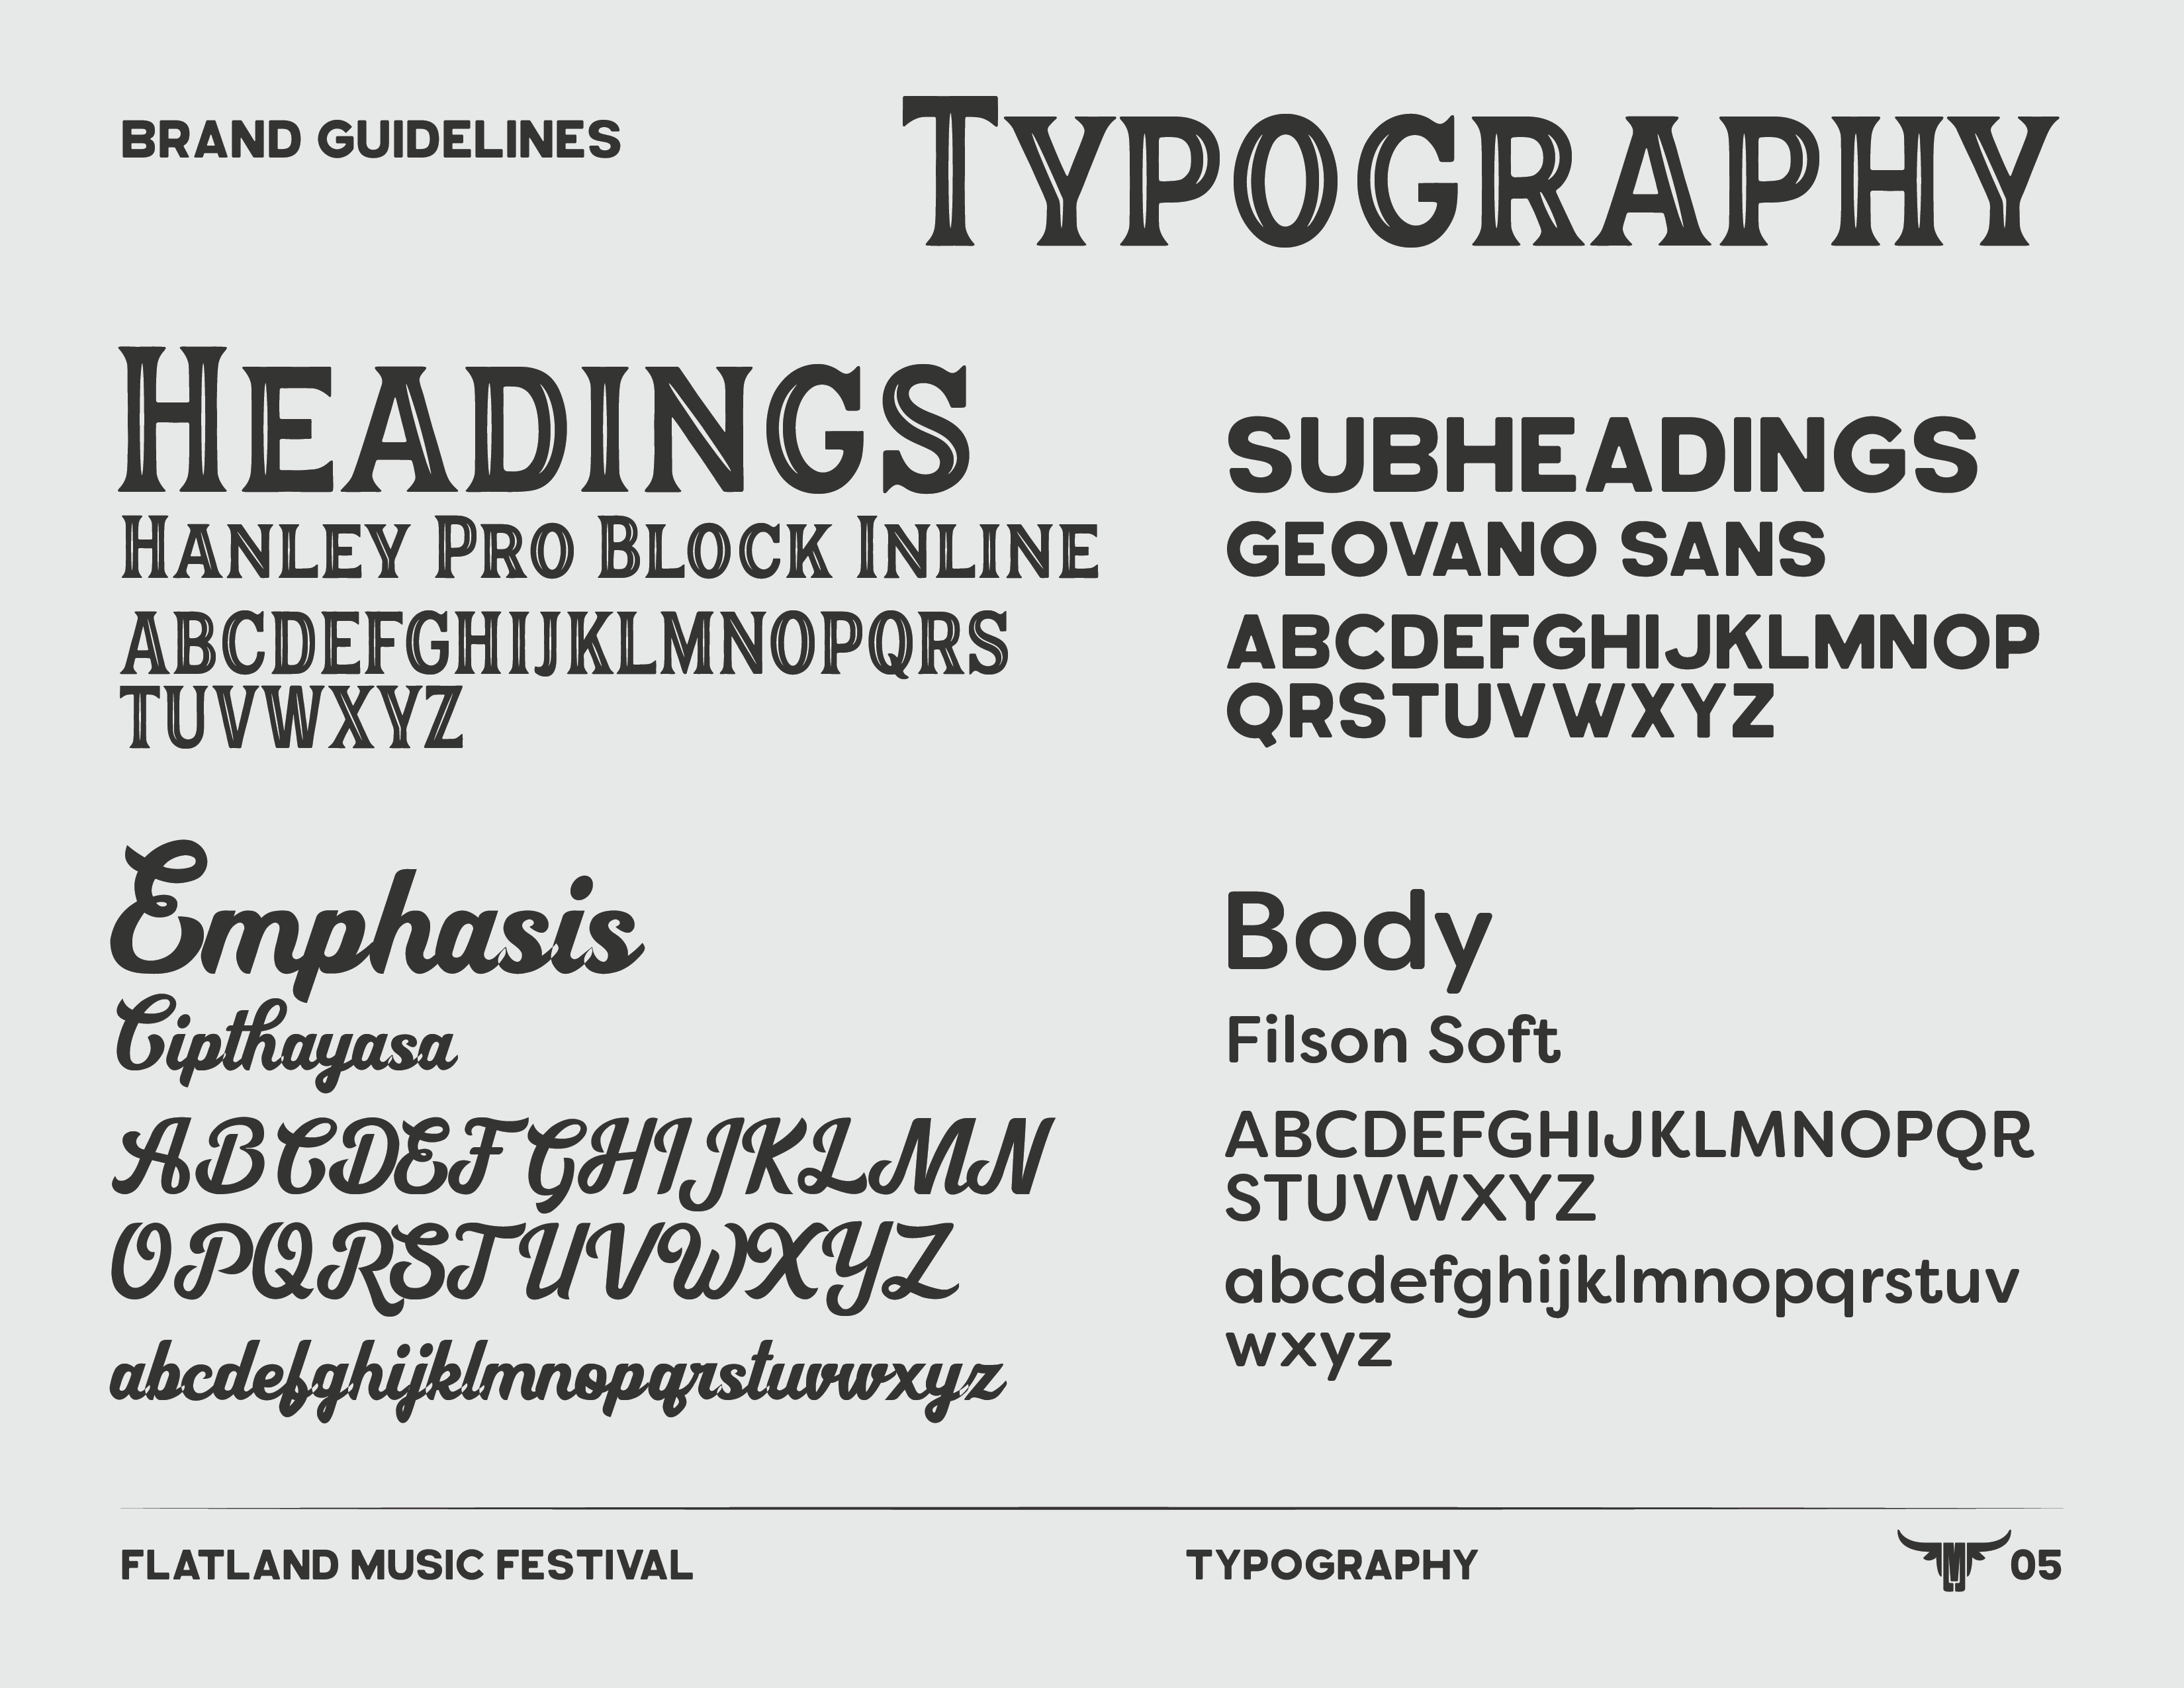 Flatland Music Festival Typography Brand Guideline created by the graphic design studio, Cre8ive